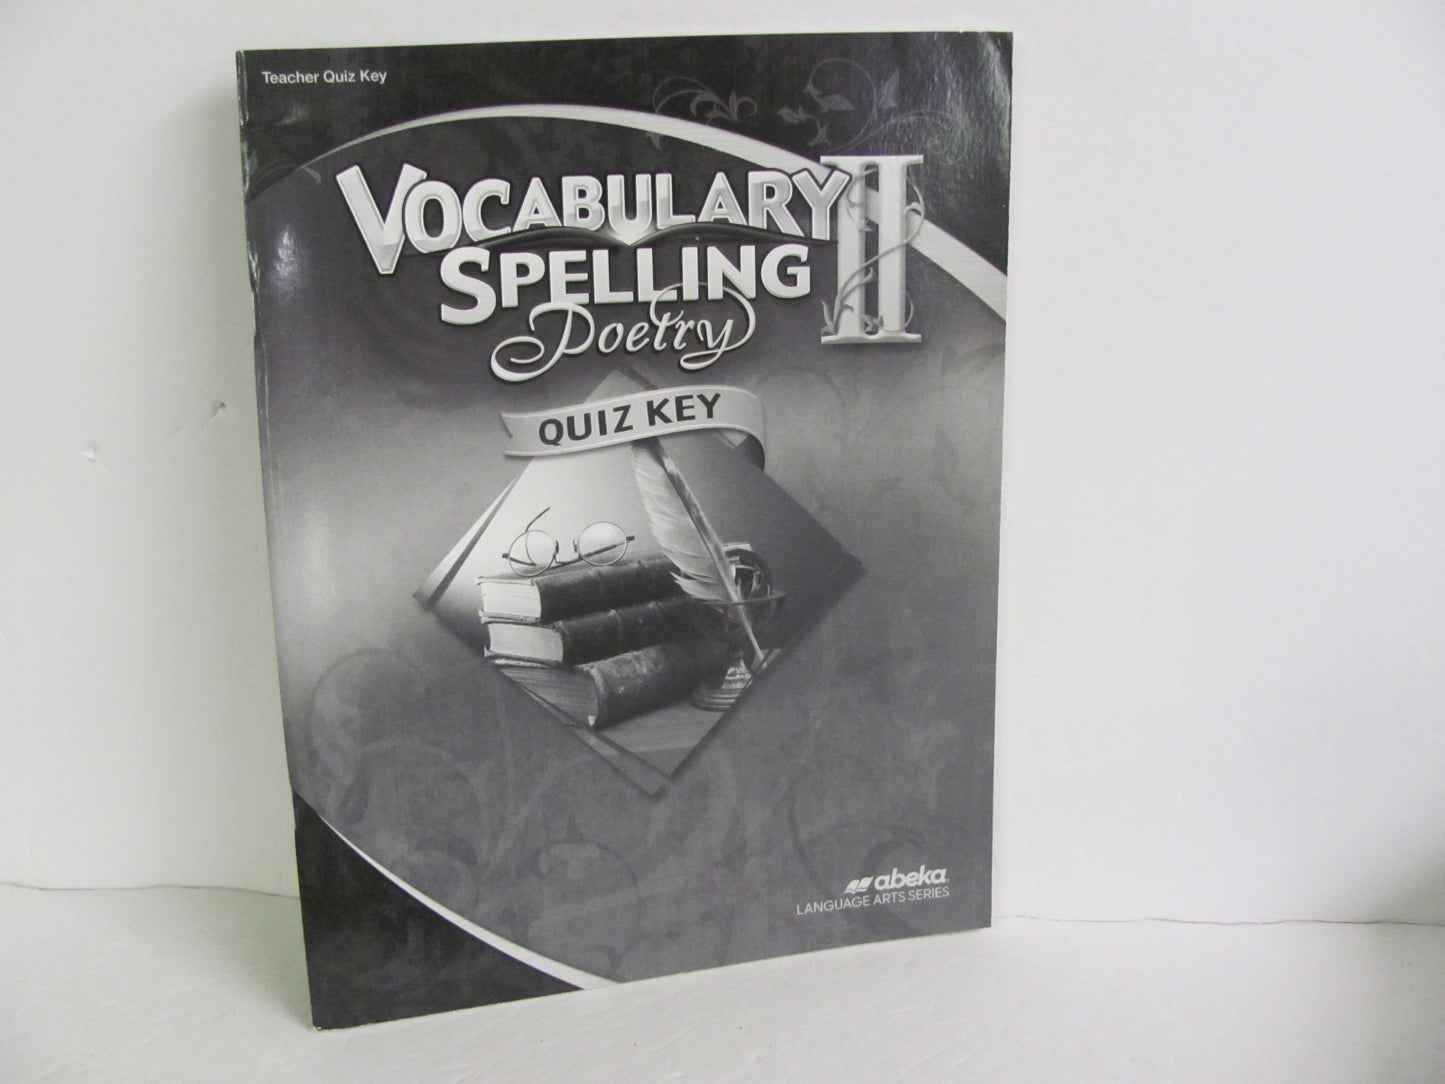 Vocabulary Spelling Poetry II Abeka Quiz Key Pre-Owned Spelling/Vocabulary Books